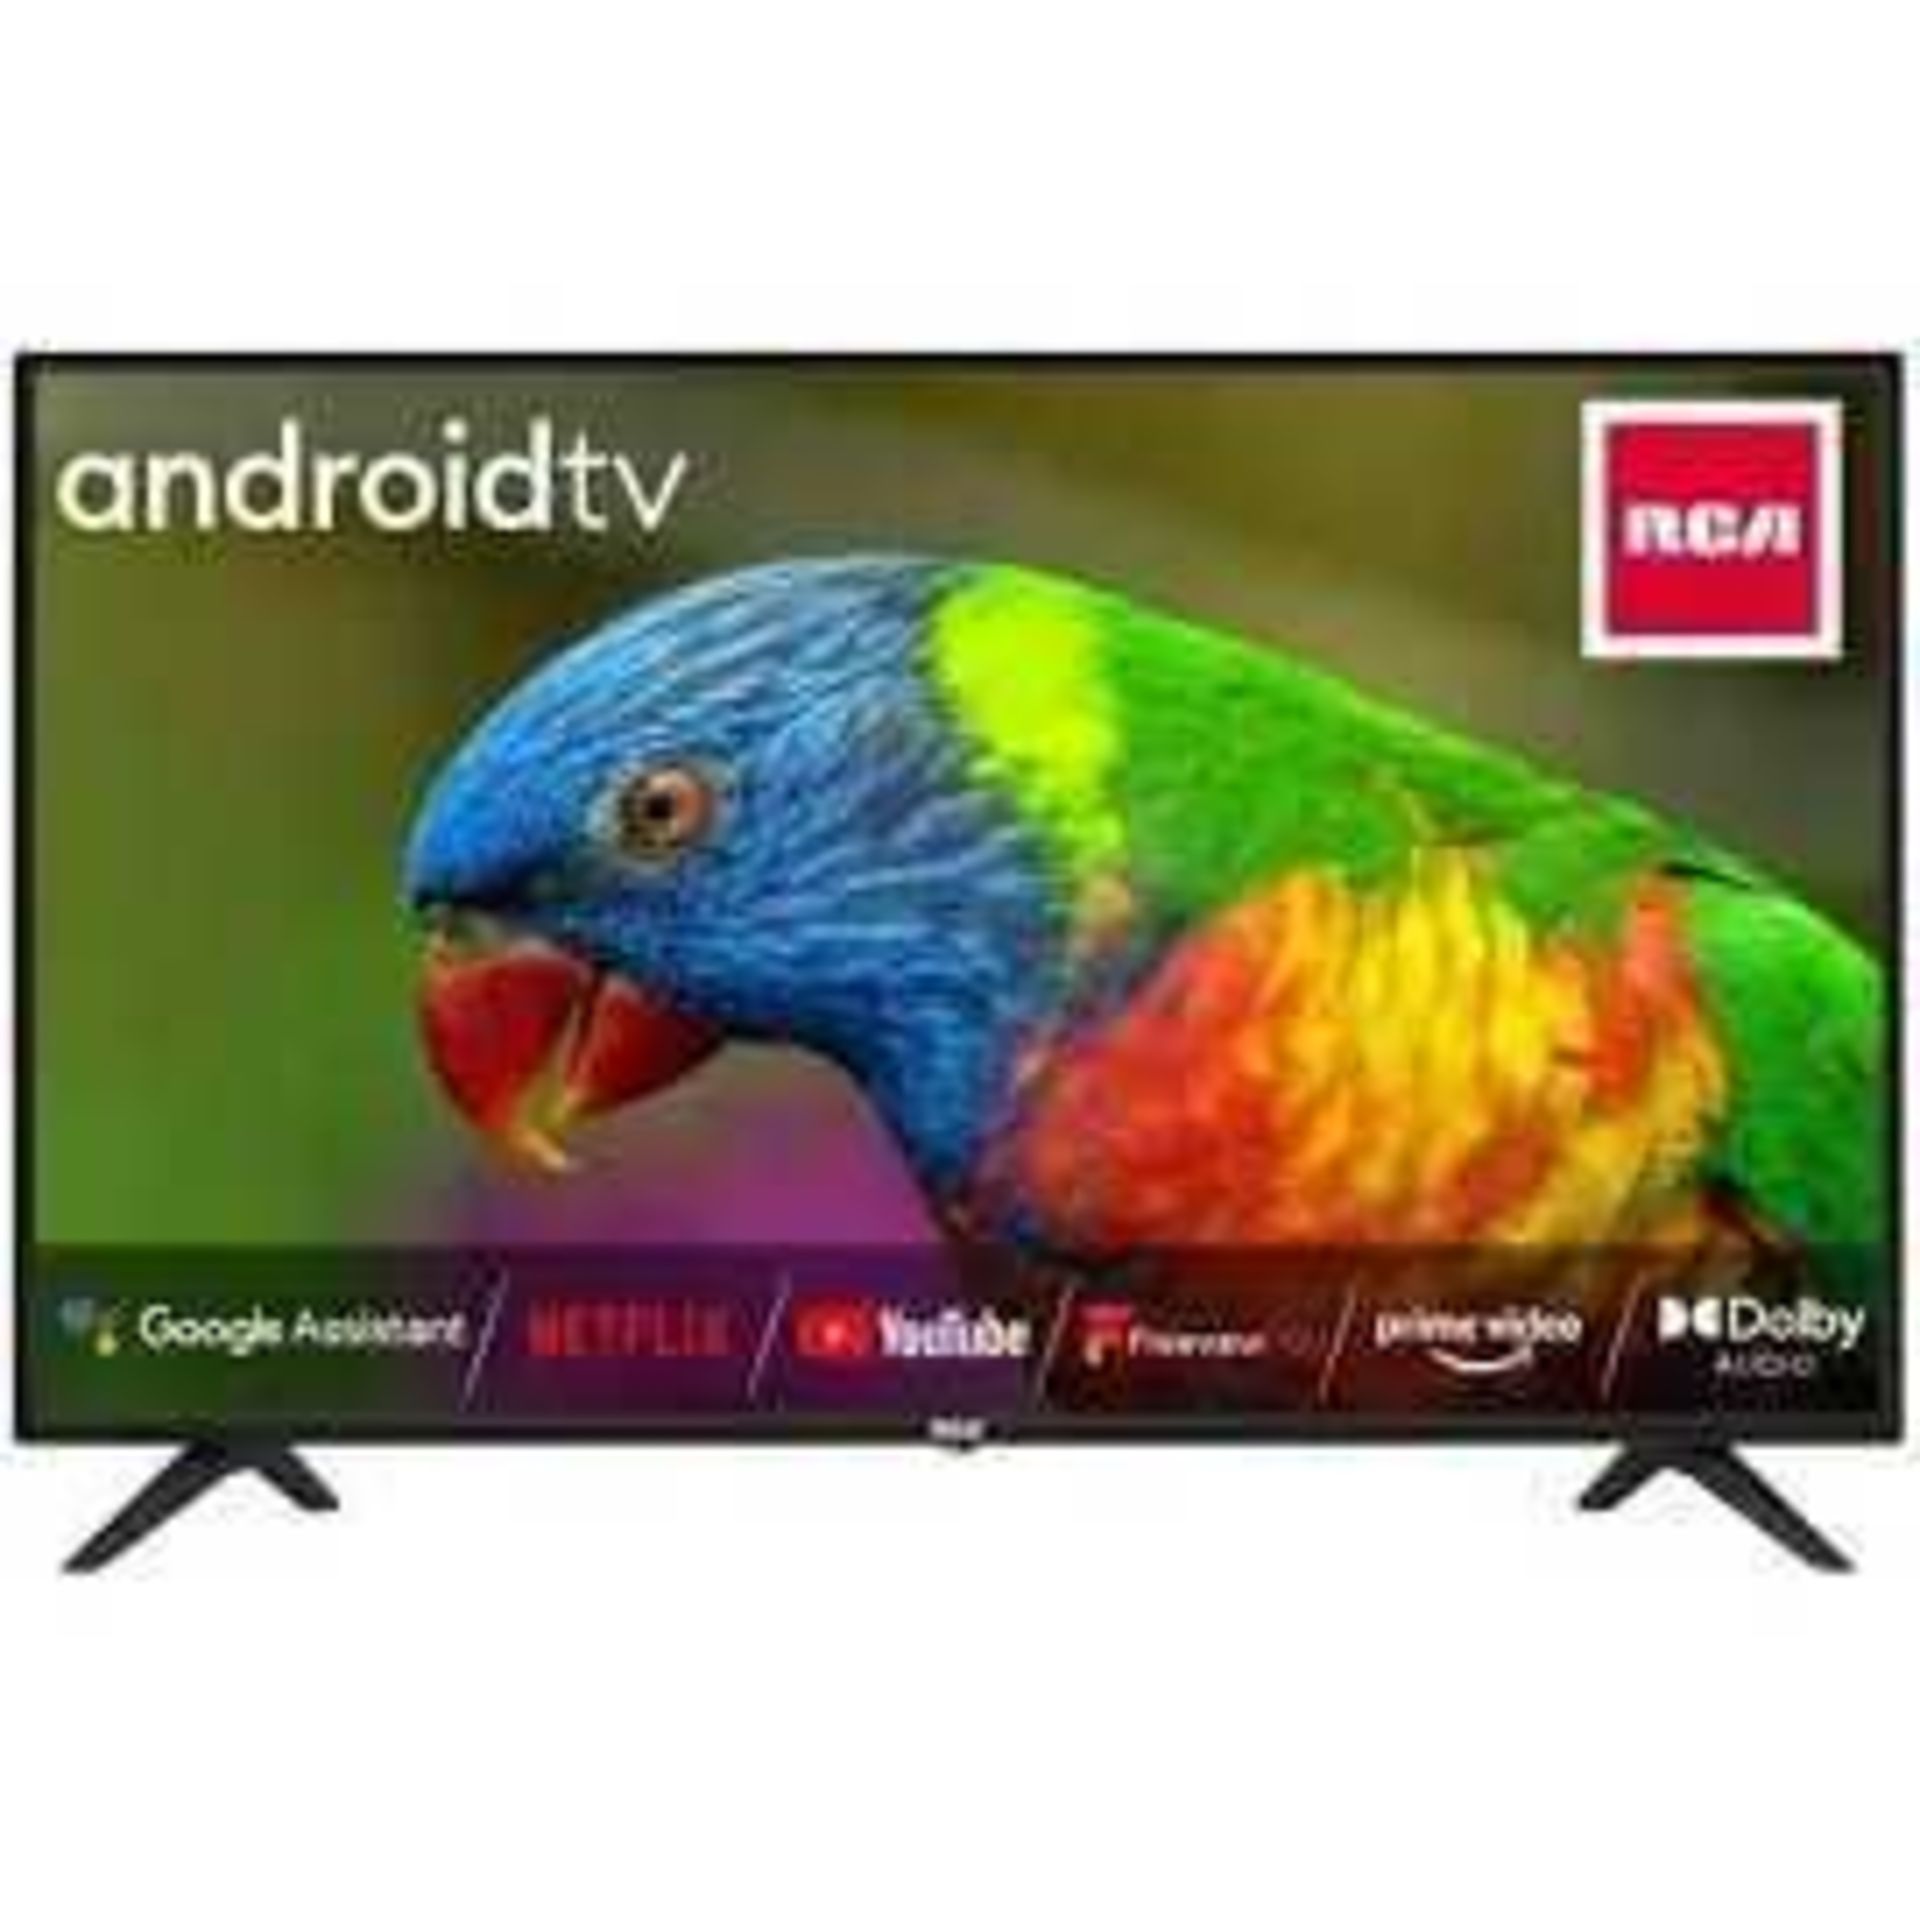 RRP £300 A Boxed Rca 43" Android Tv - Image 2 of 4